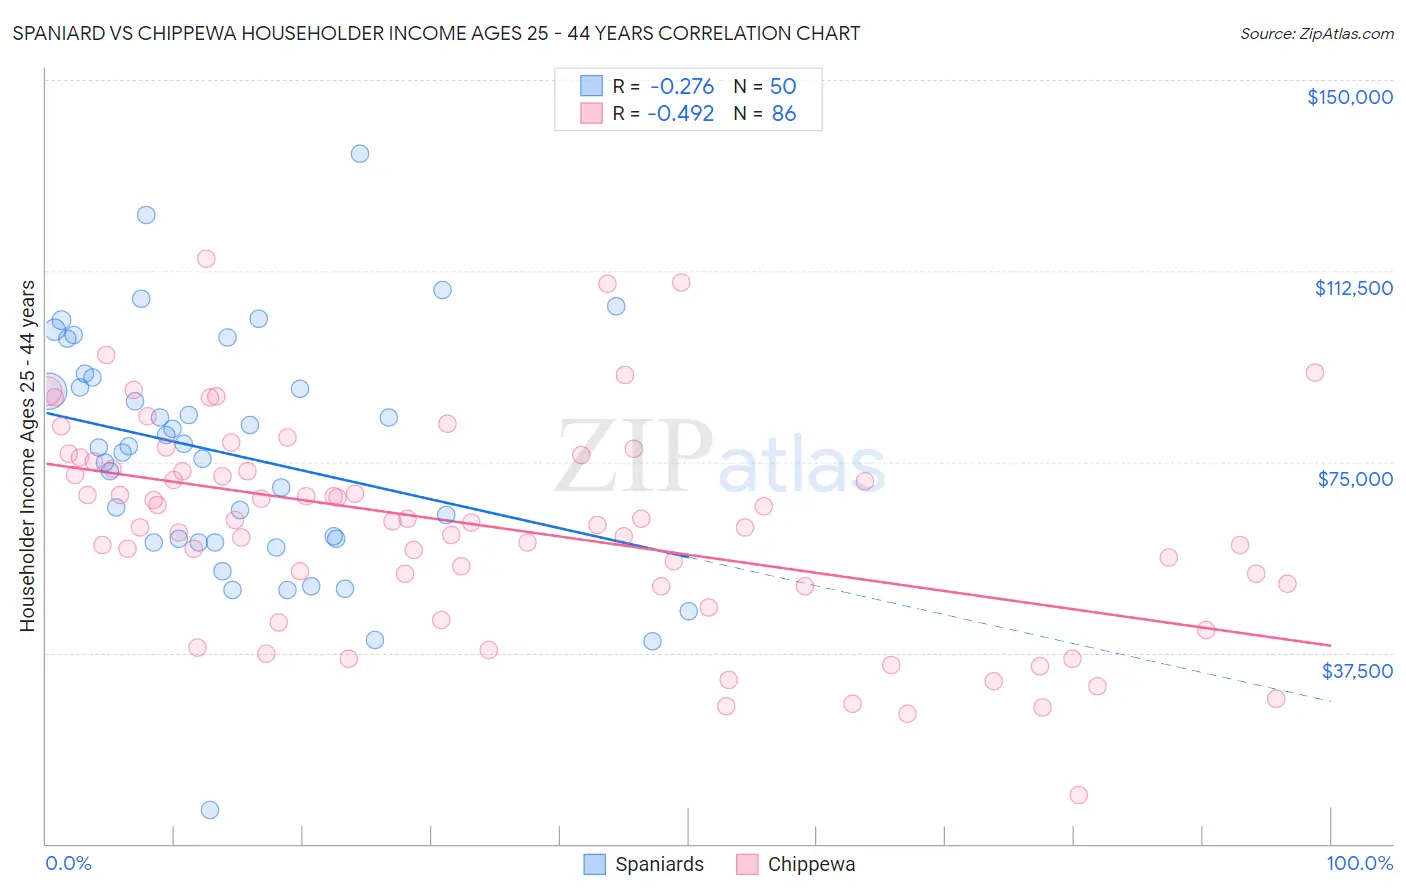 Spaniard vs Chippewa Householder Income Ages 25 - 44 years